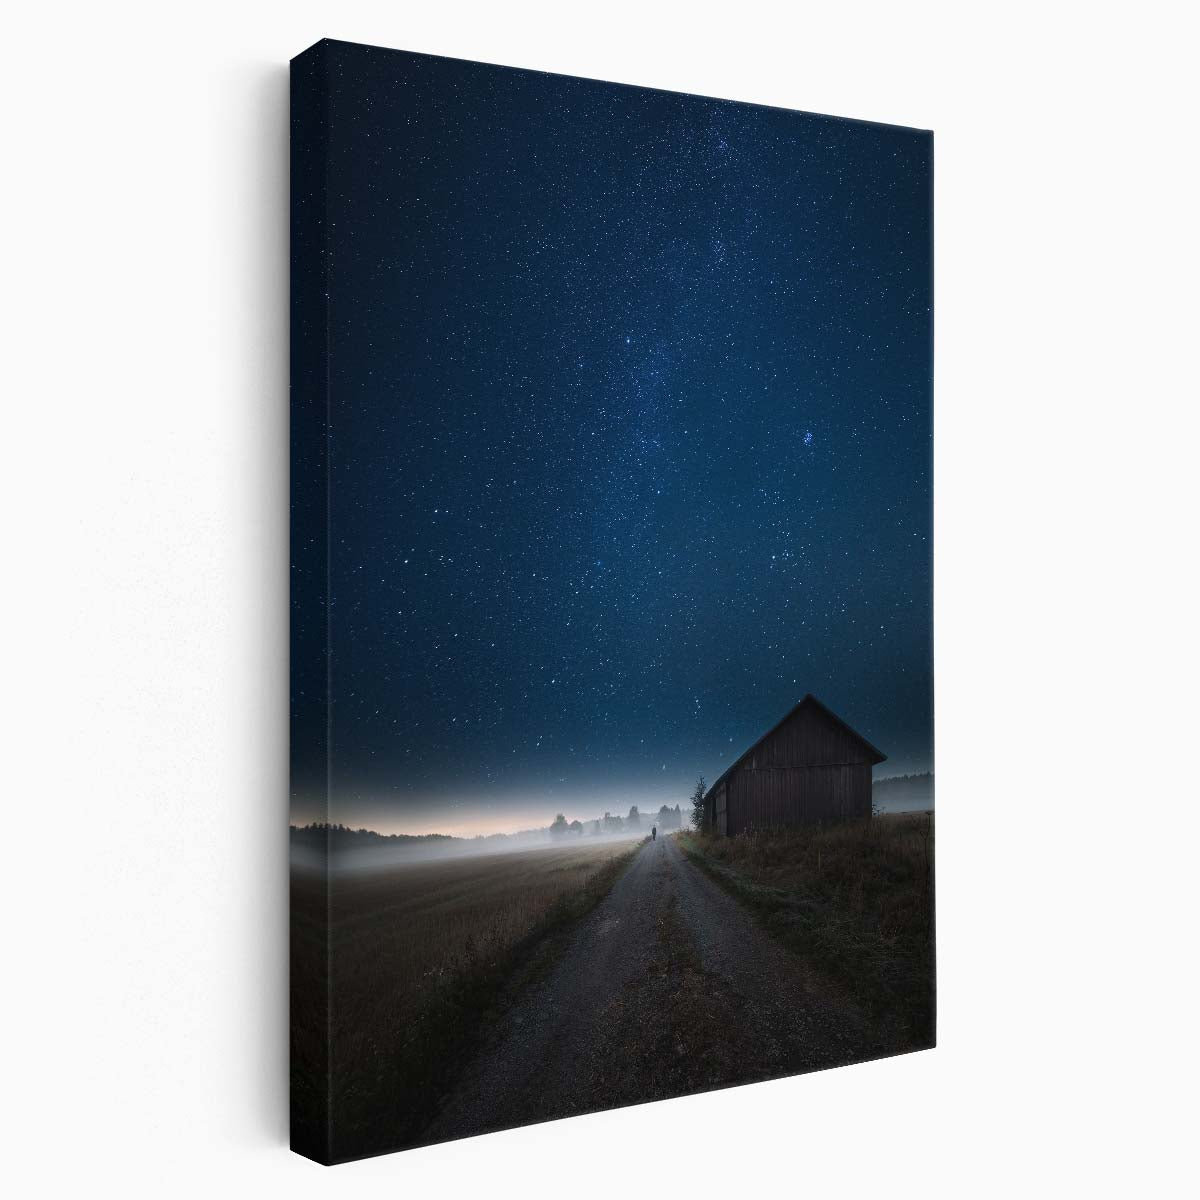 Starry Night Photography Lonely Figure Amidst Rural Landscape by Luxuriance Designs, made in USA